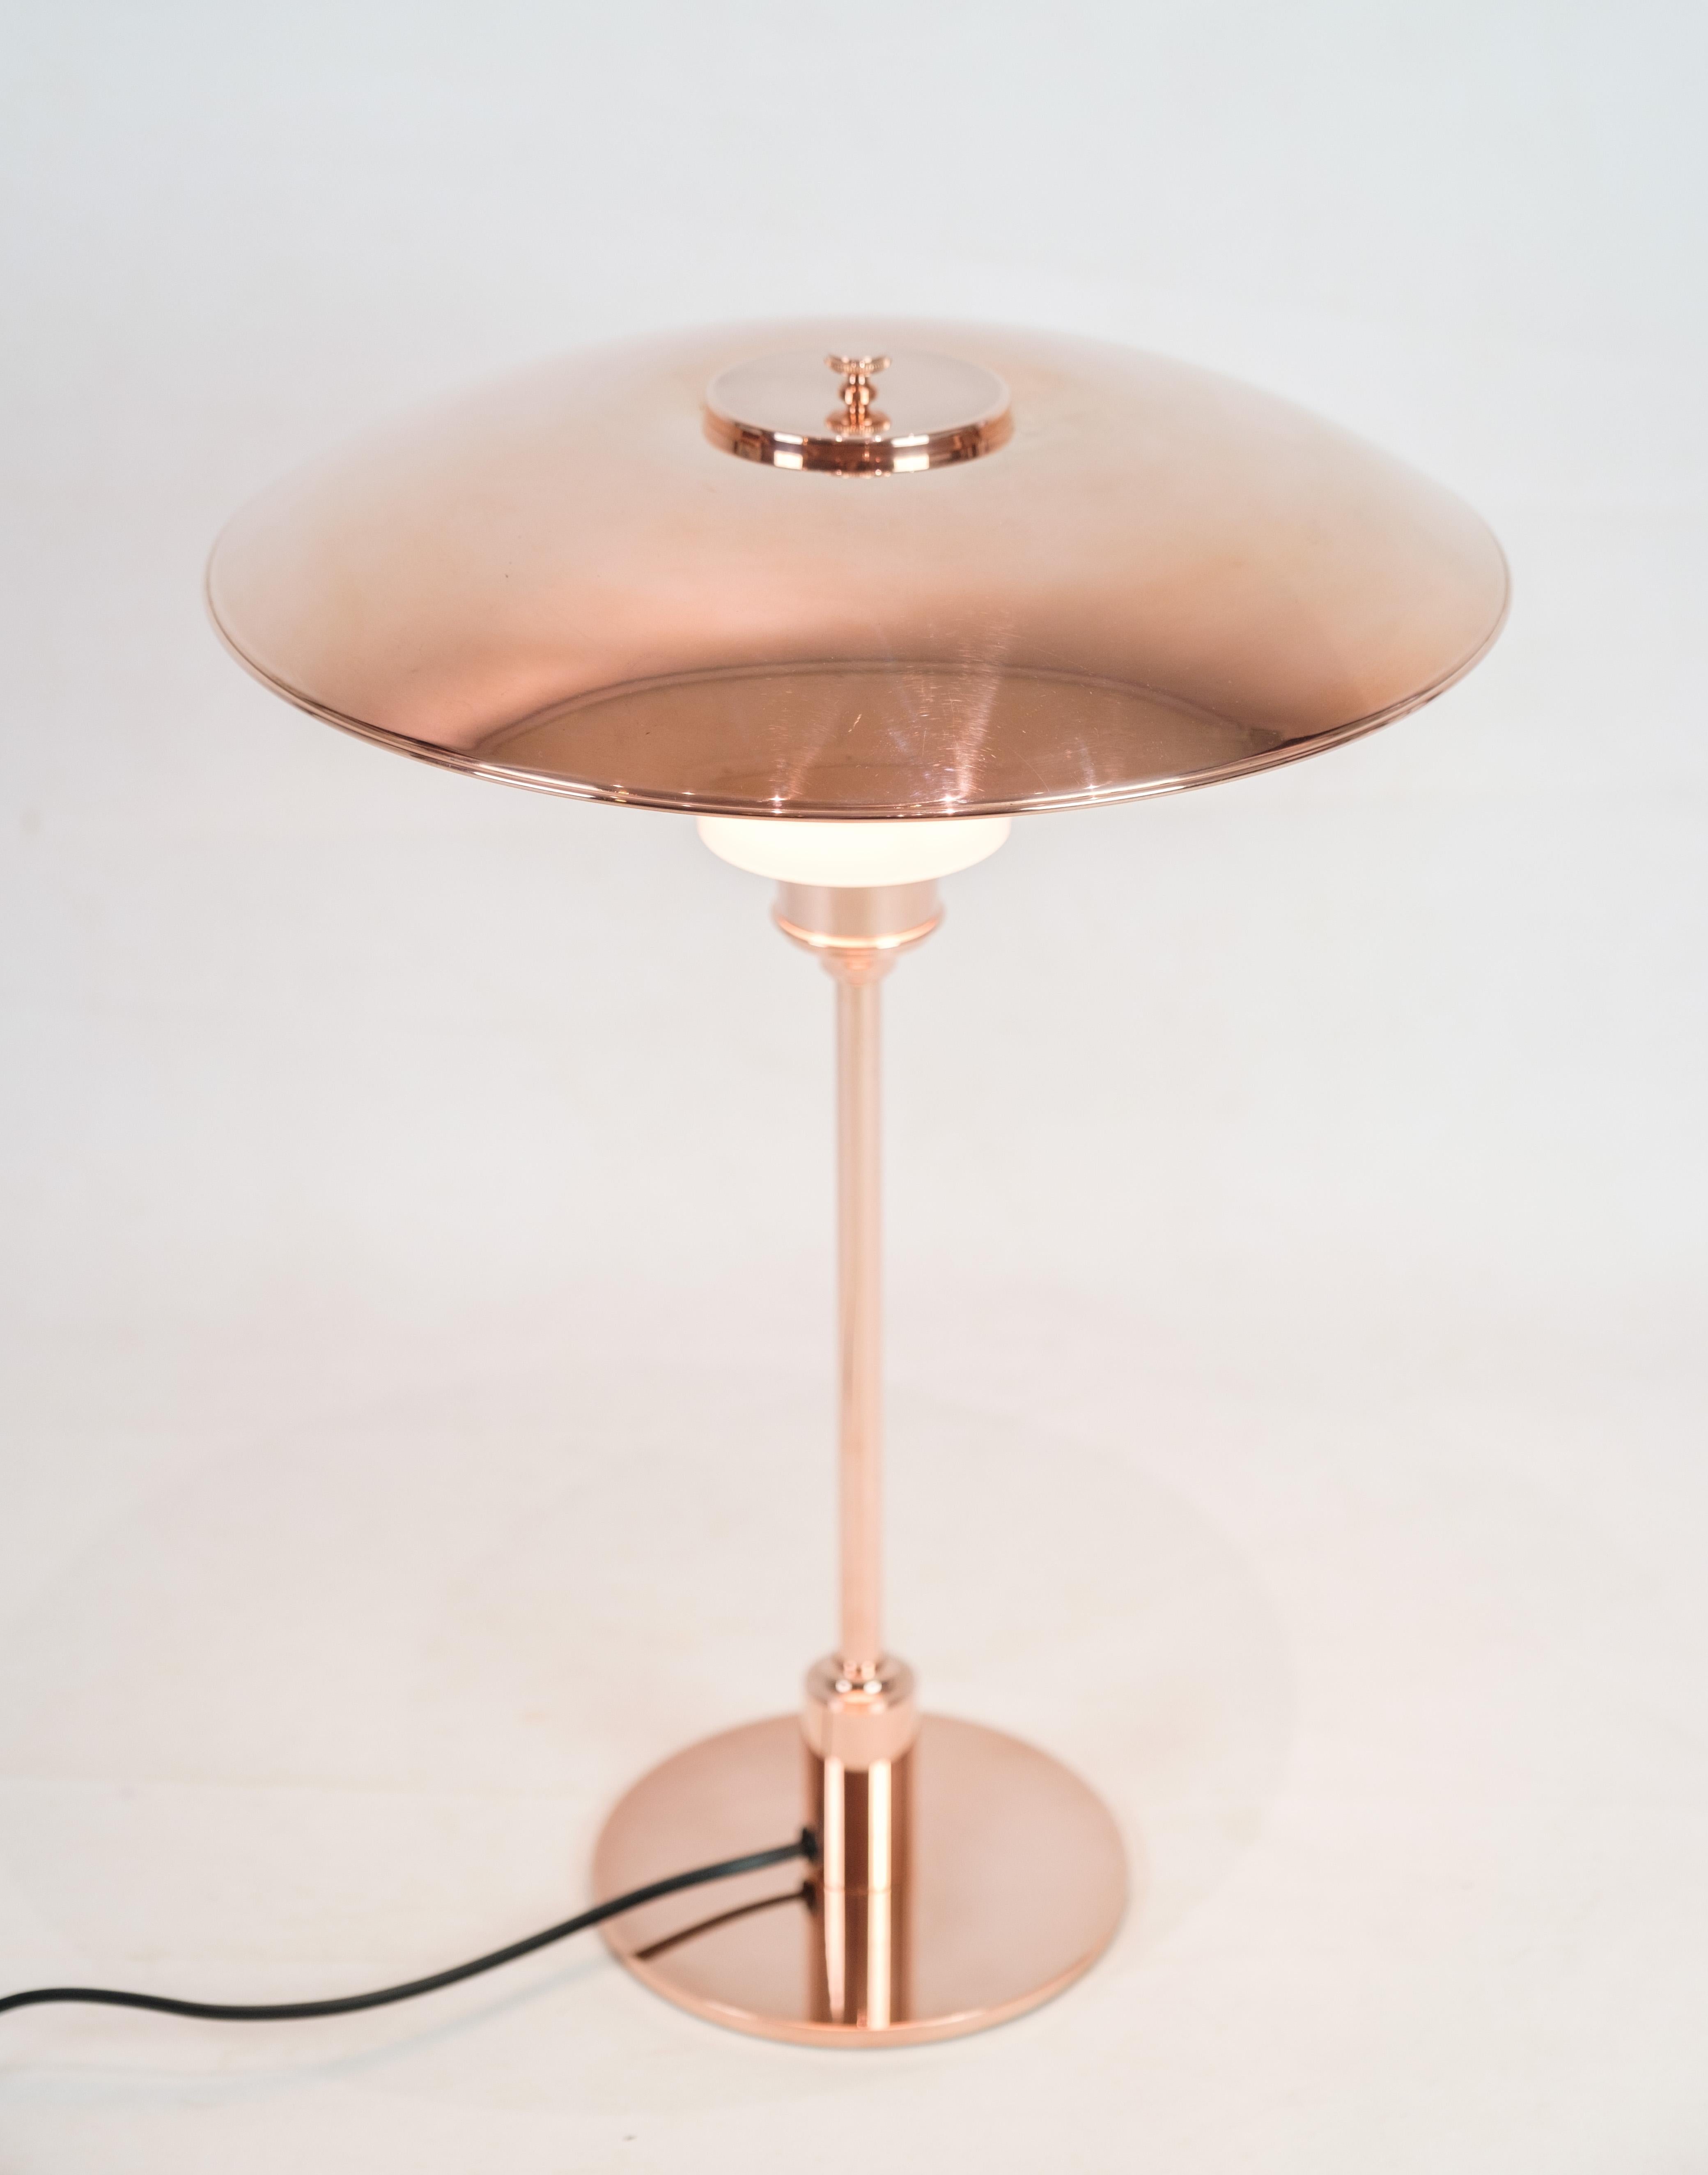 PH Table lamp, model PH3½-2½, limited edition, designed by Poul Henningsen and manufactured by Louis Poulsen. The lamp is made of copper with an upper shade in copper and two lower shades in white opal glass. An upper screen in white opal glass is